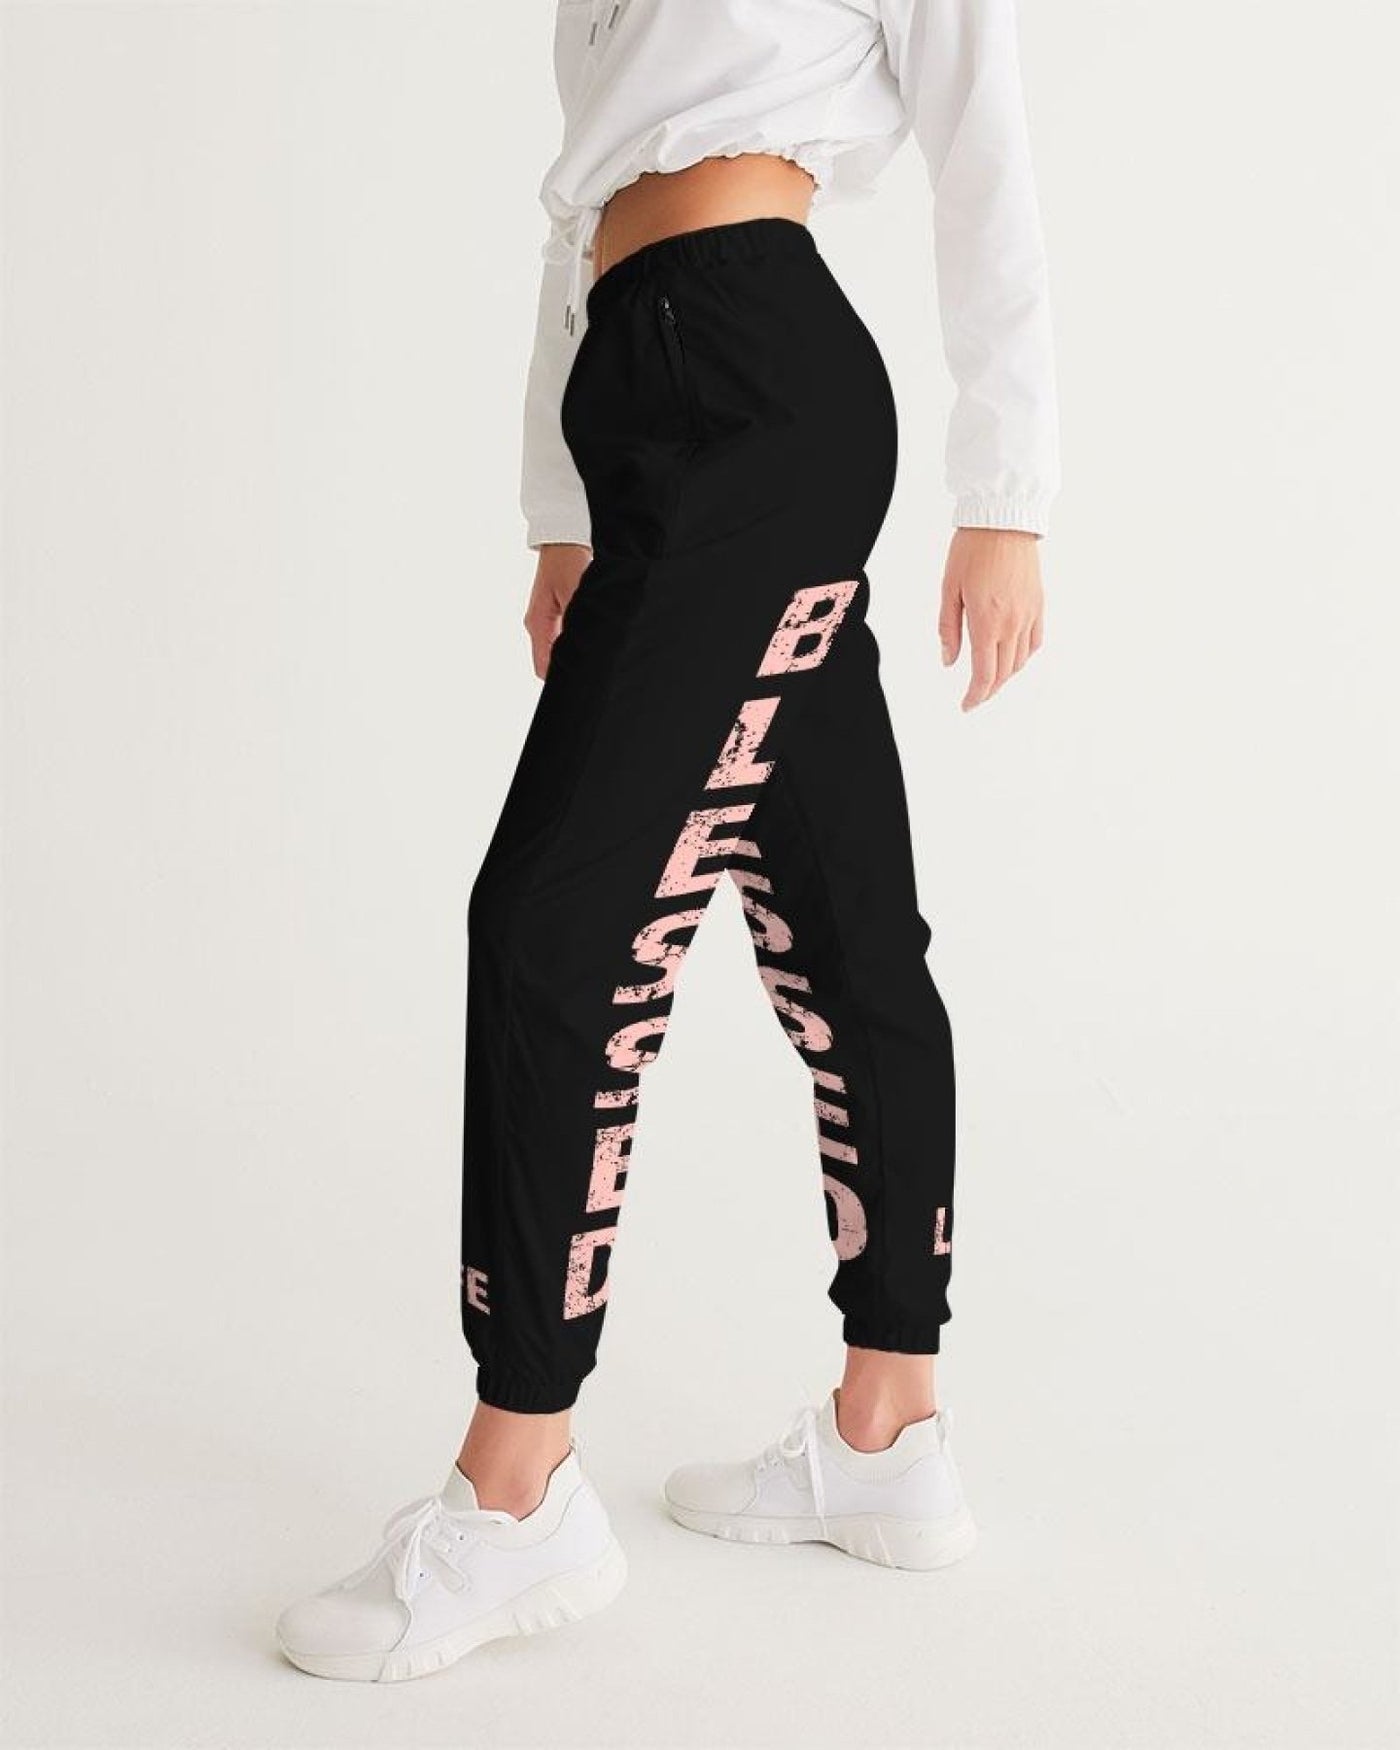 Womens Track Pants - Black & Peach Blessed Graphic Sports Pants - Womens